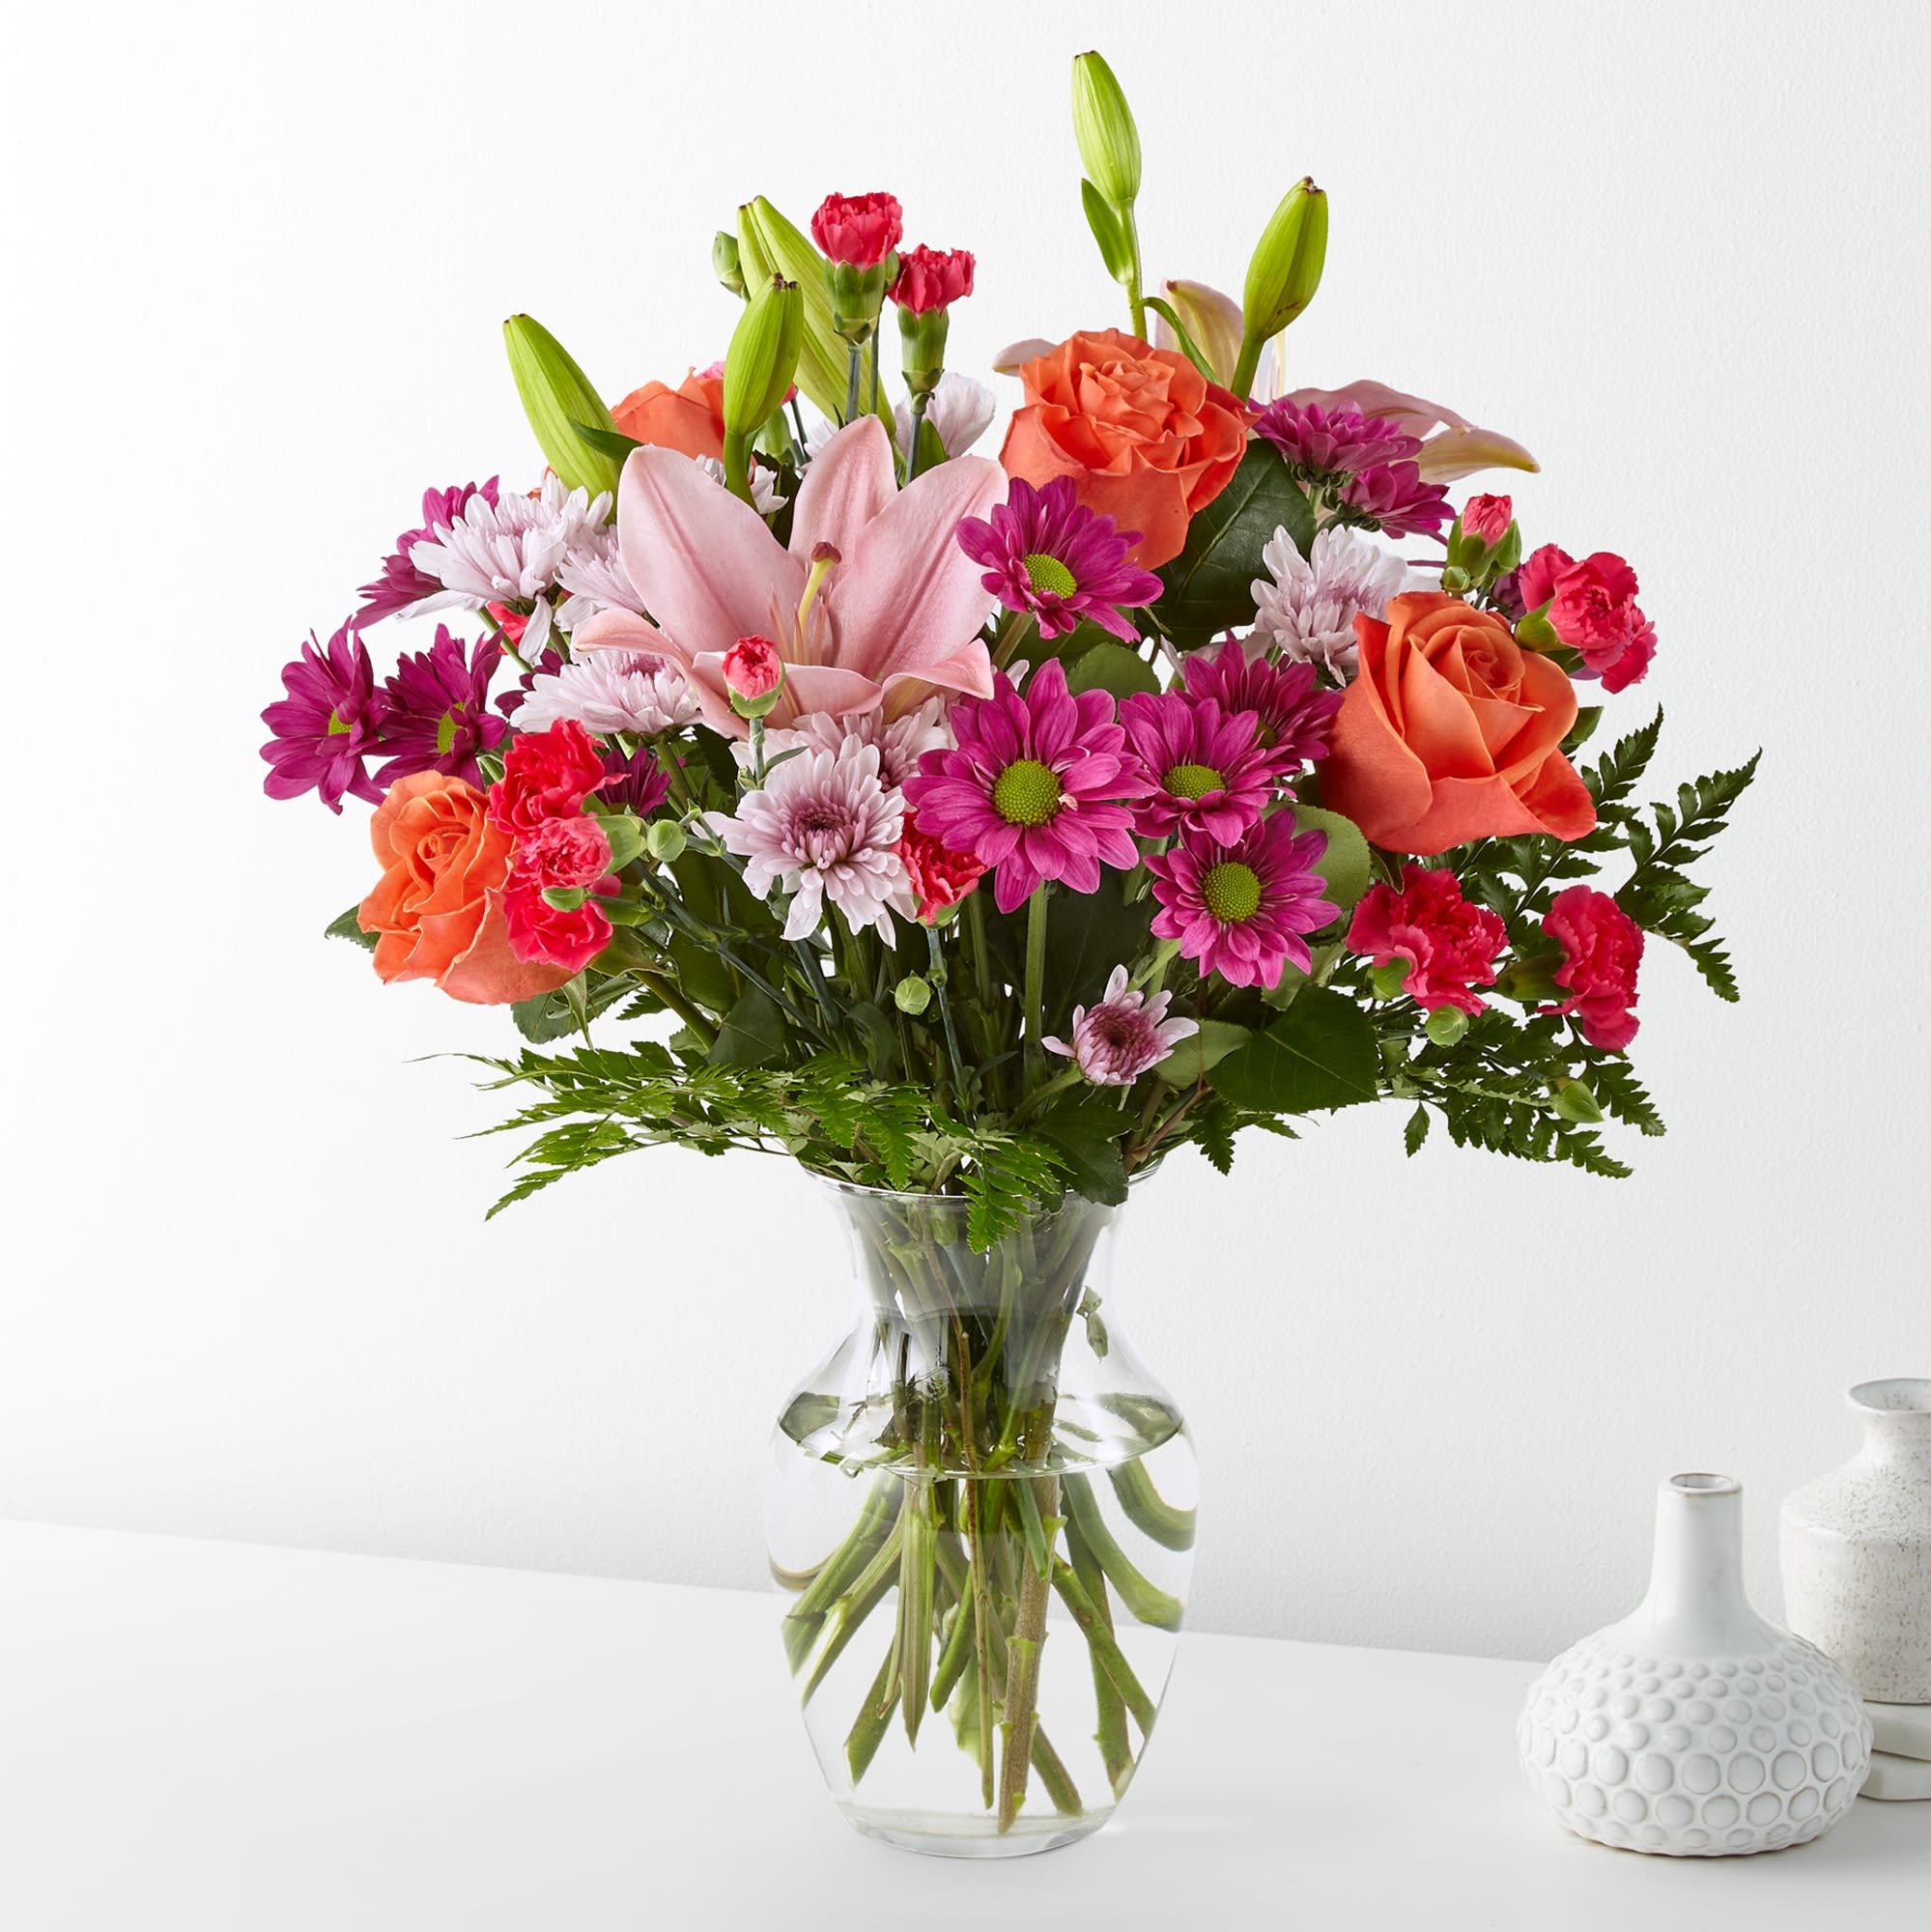 Light Of My Life - The Light of My Life Bouquet blossoms with brilliant color and a sweet sophistication to create the perfect impression! Pink Lilies make the eyes dance across the unique design of this flower bouquet, surrounded by the blushing colors of orange roses, lavender cushion poms, hot pink carnations, and lush greens. Presented in a clear glass vase, this fresh flower arrangement has been created just for you to help you send your sweetest thank you, happy anniversary, or thinking of you wishes.